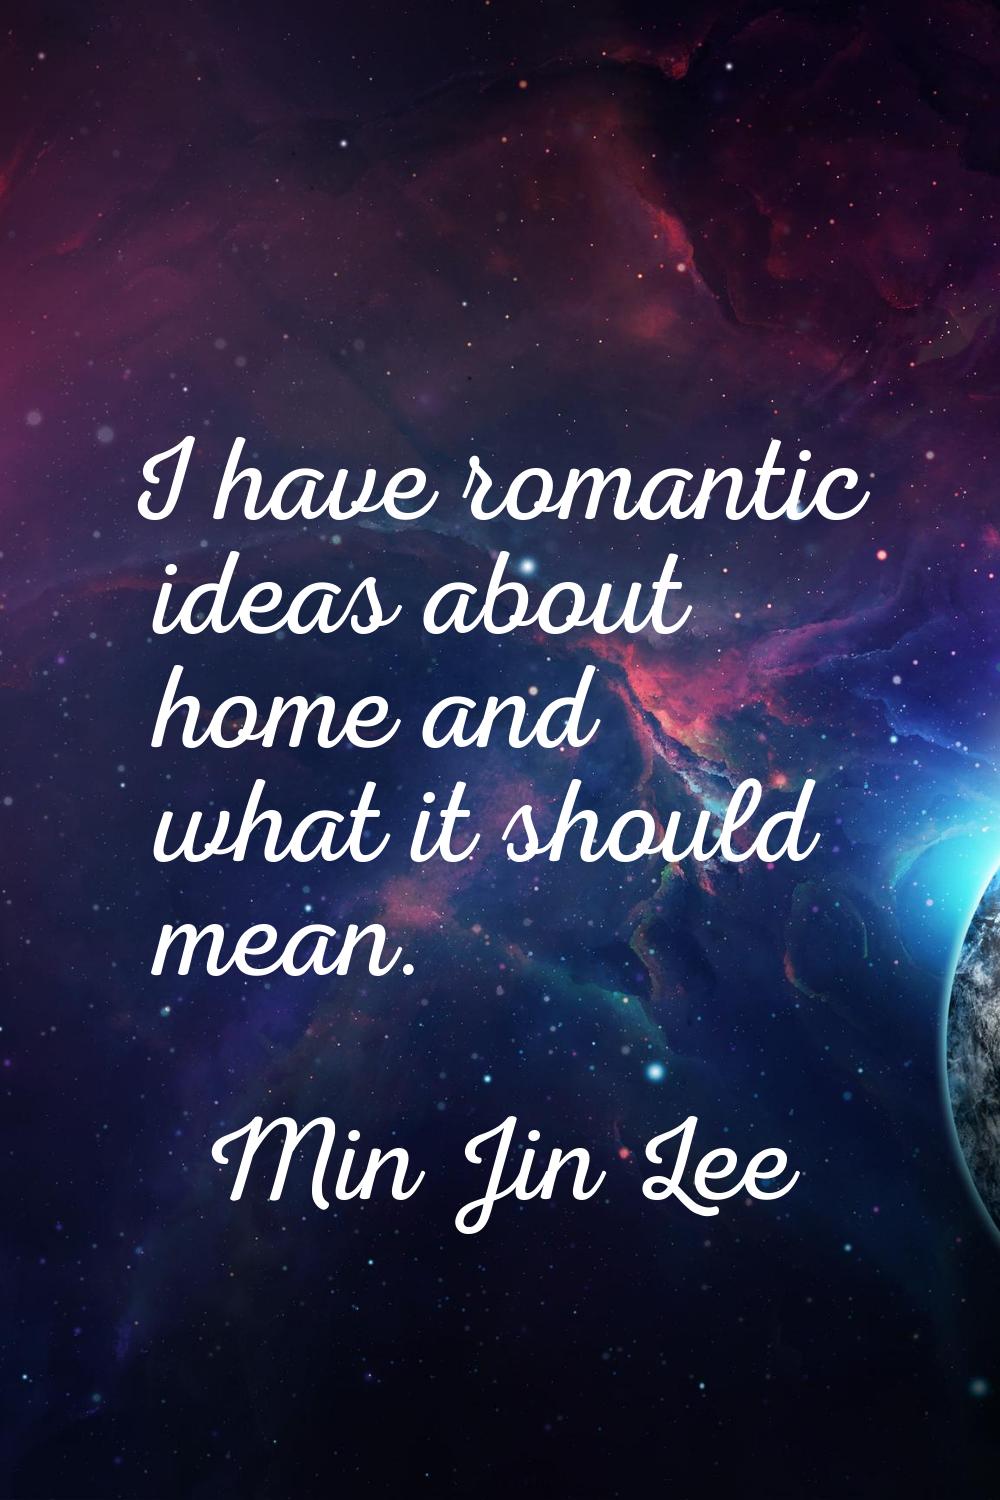 I have romantic ideas about home and what it should mean.